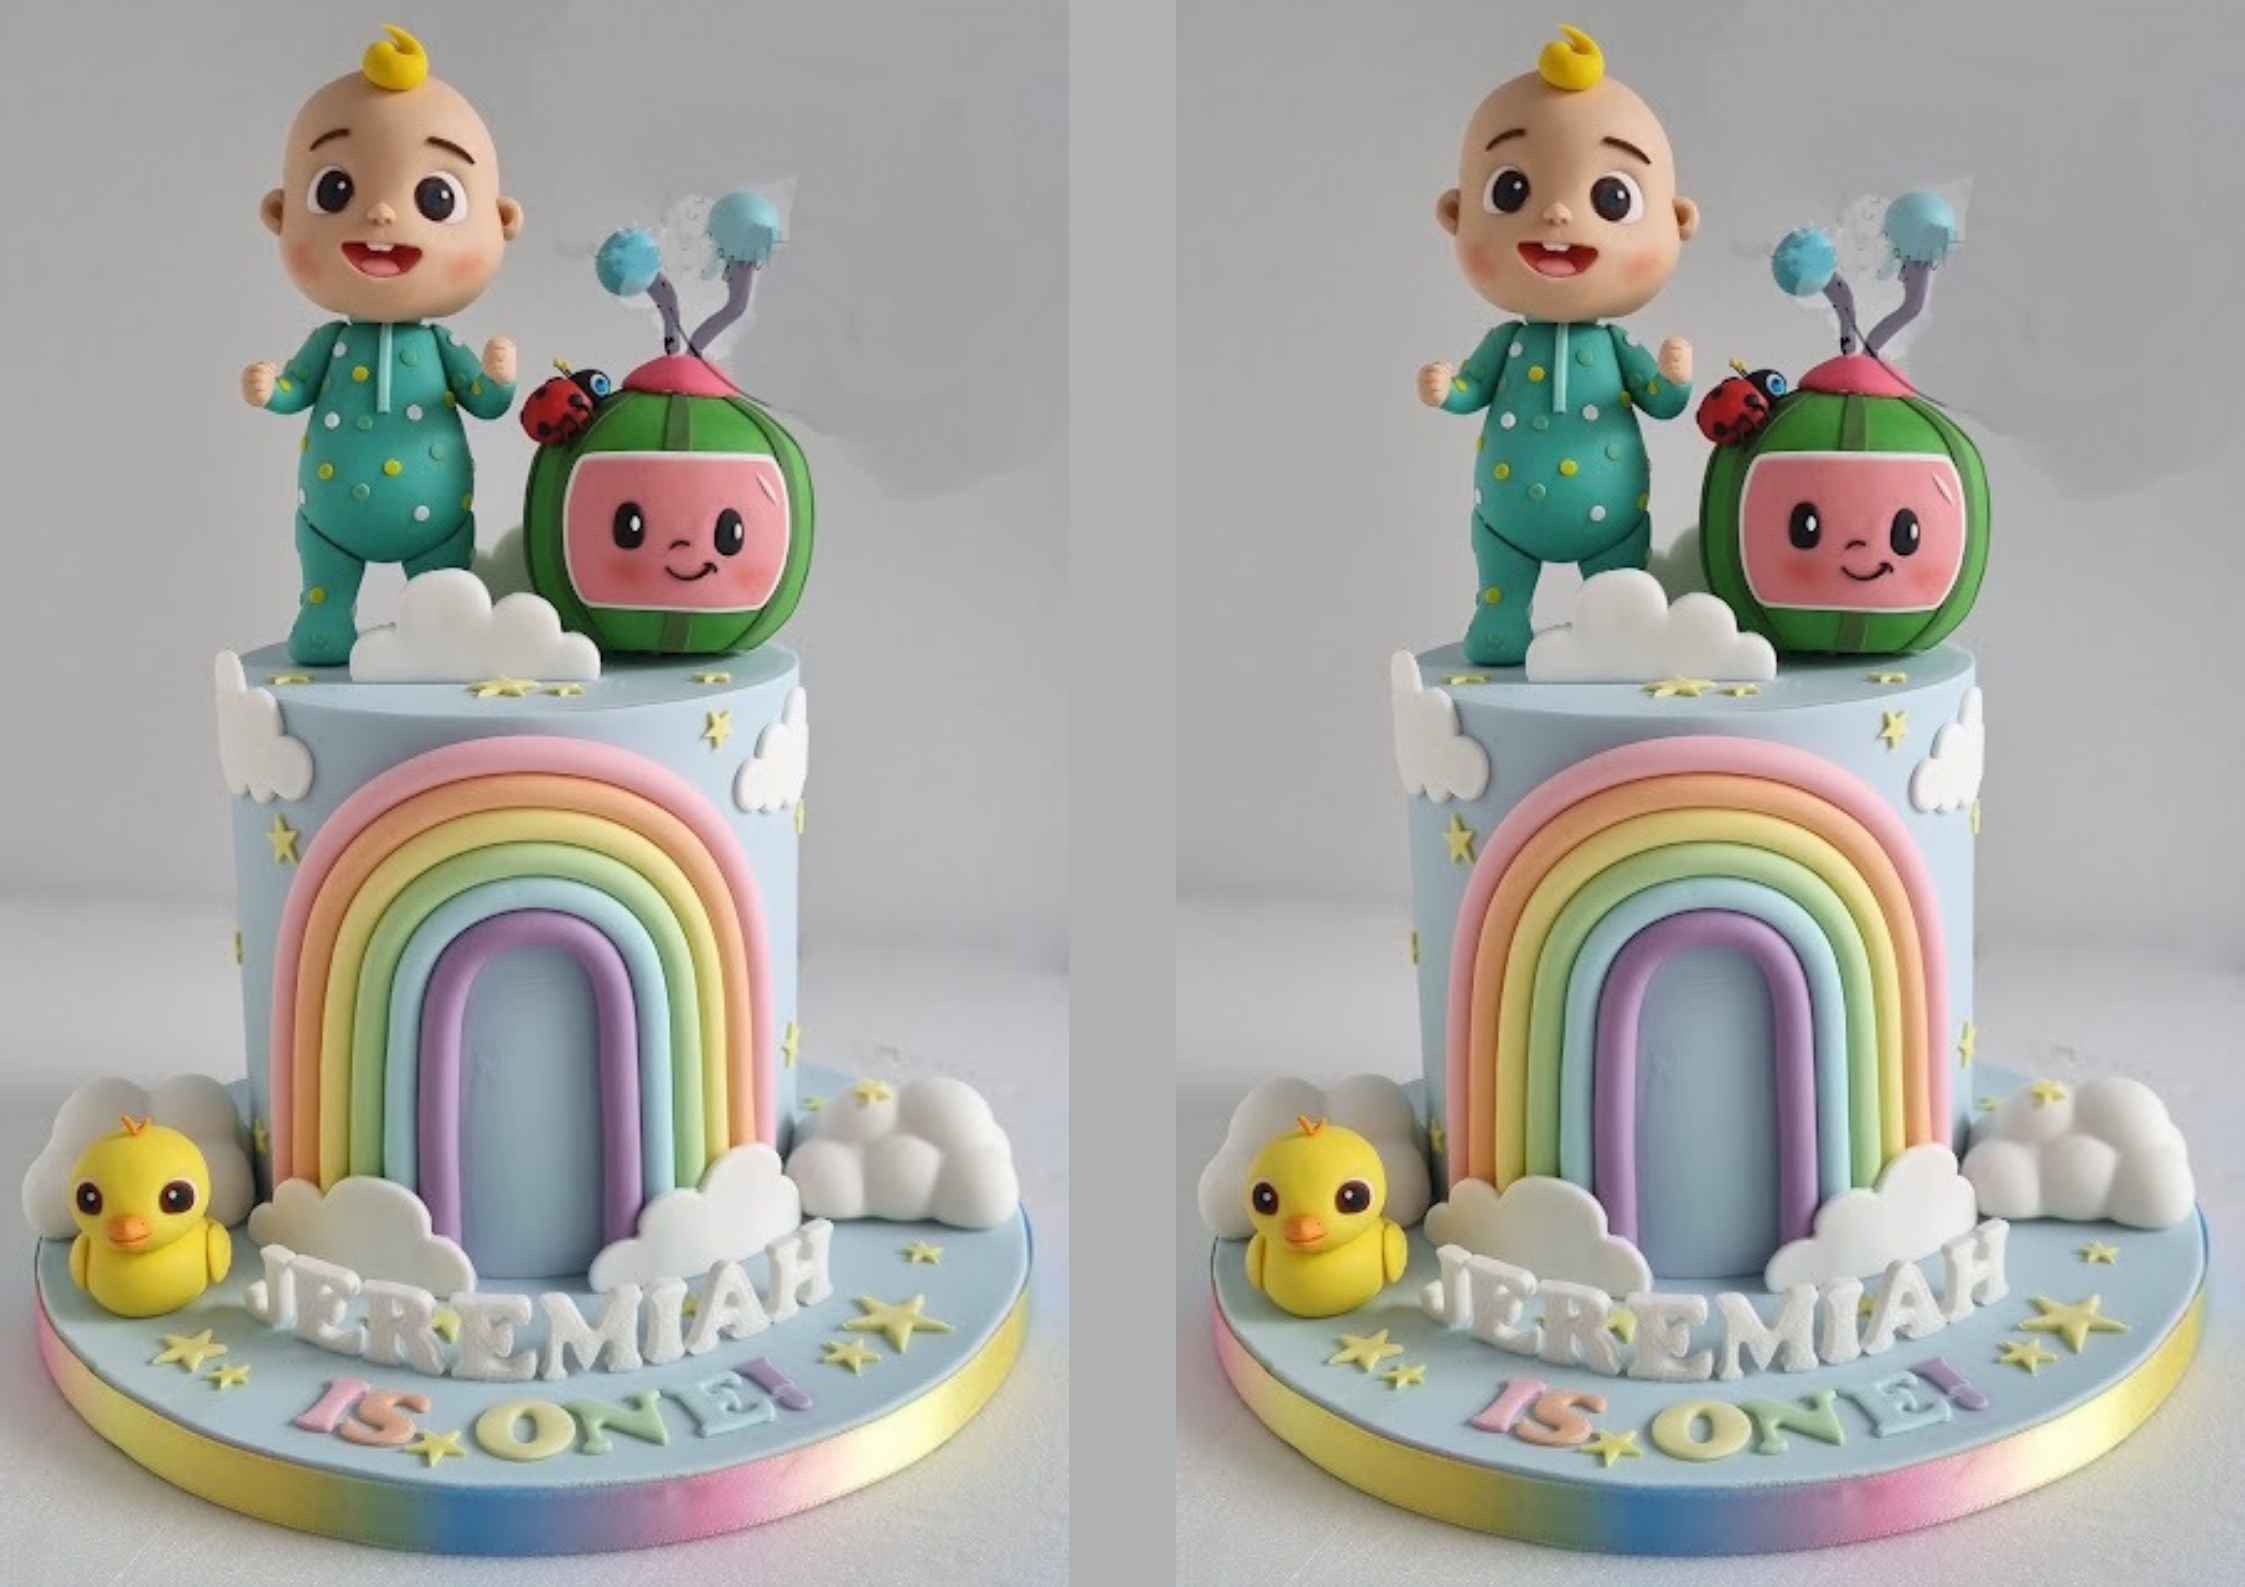 Rainbow 🌈 theme cake for a cute little girl's 3rd birthday celebration🥳  Flavour- Vancho (delicious vanilla & chocolate) #cake #... | Instagram